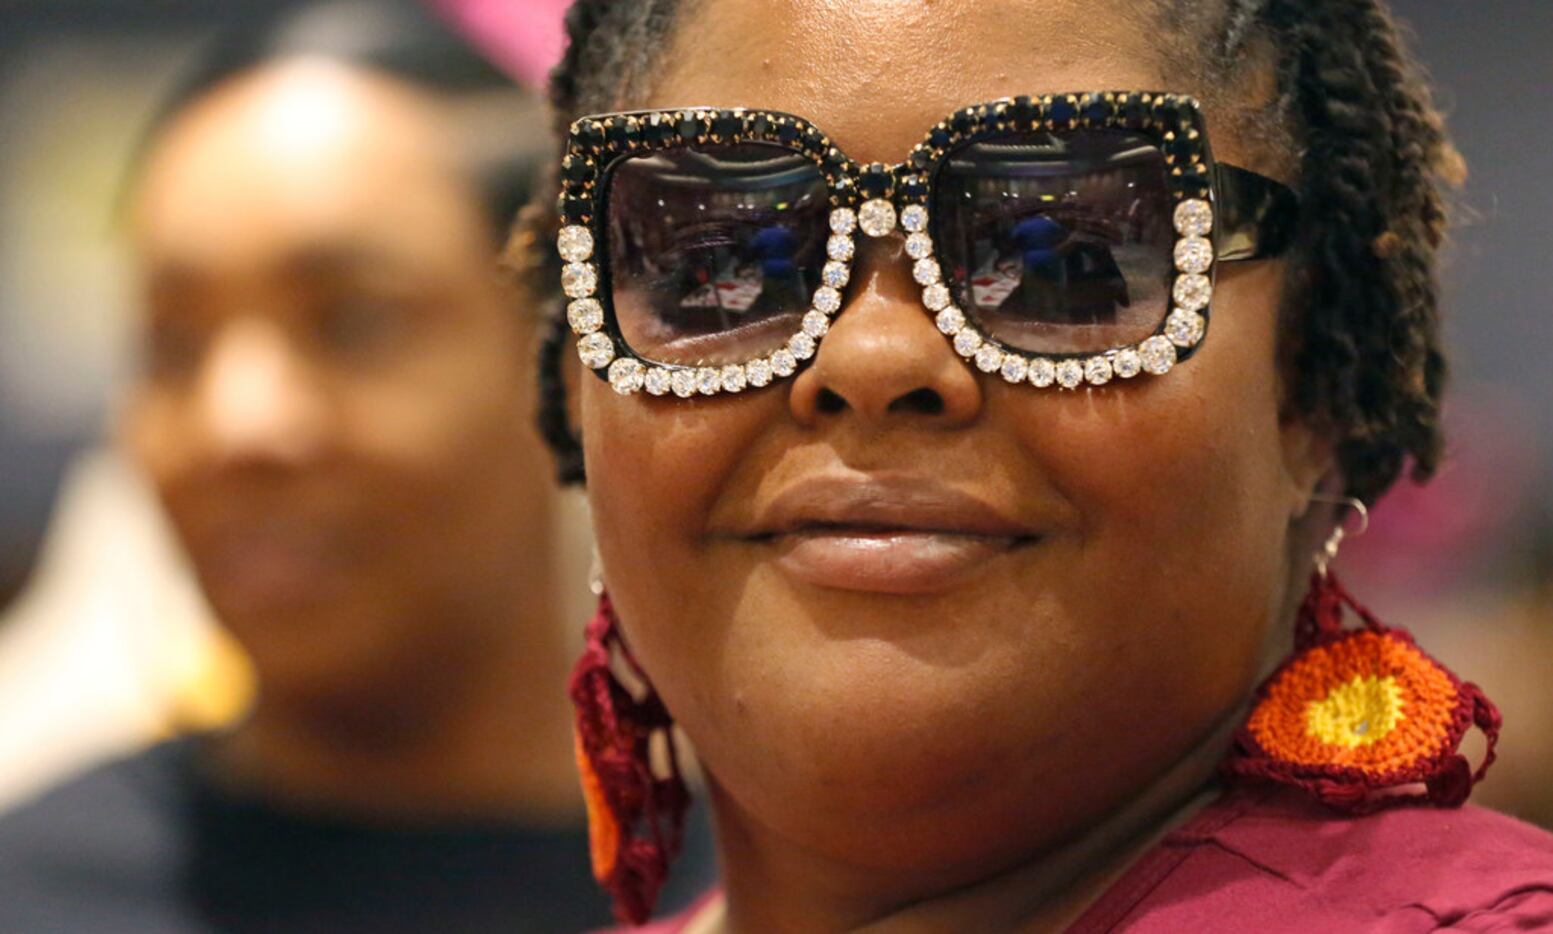 Katrina Whitfield tries on some stylish sunglasses during the Afrolicious Hair and Beauty...